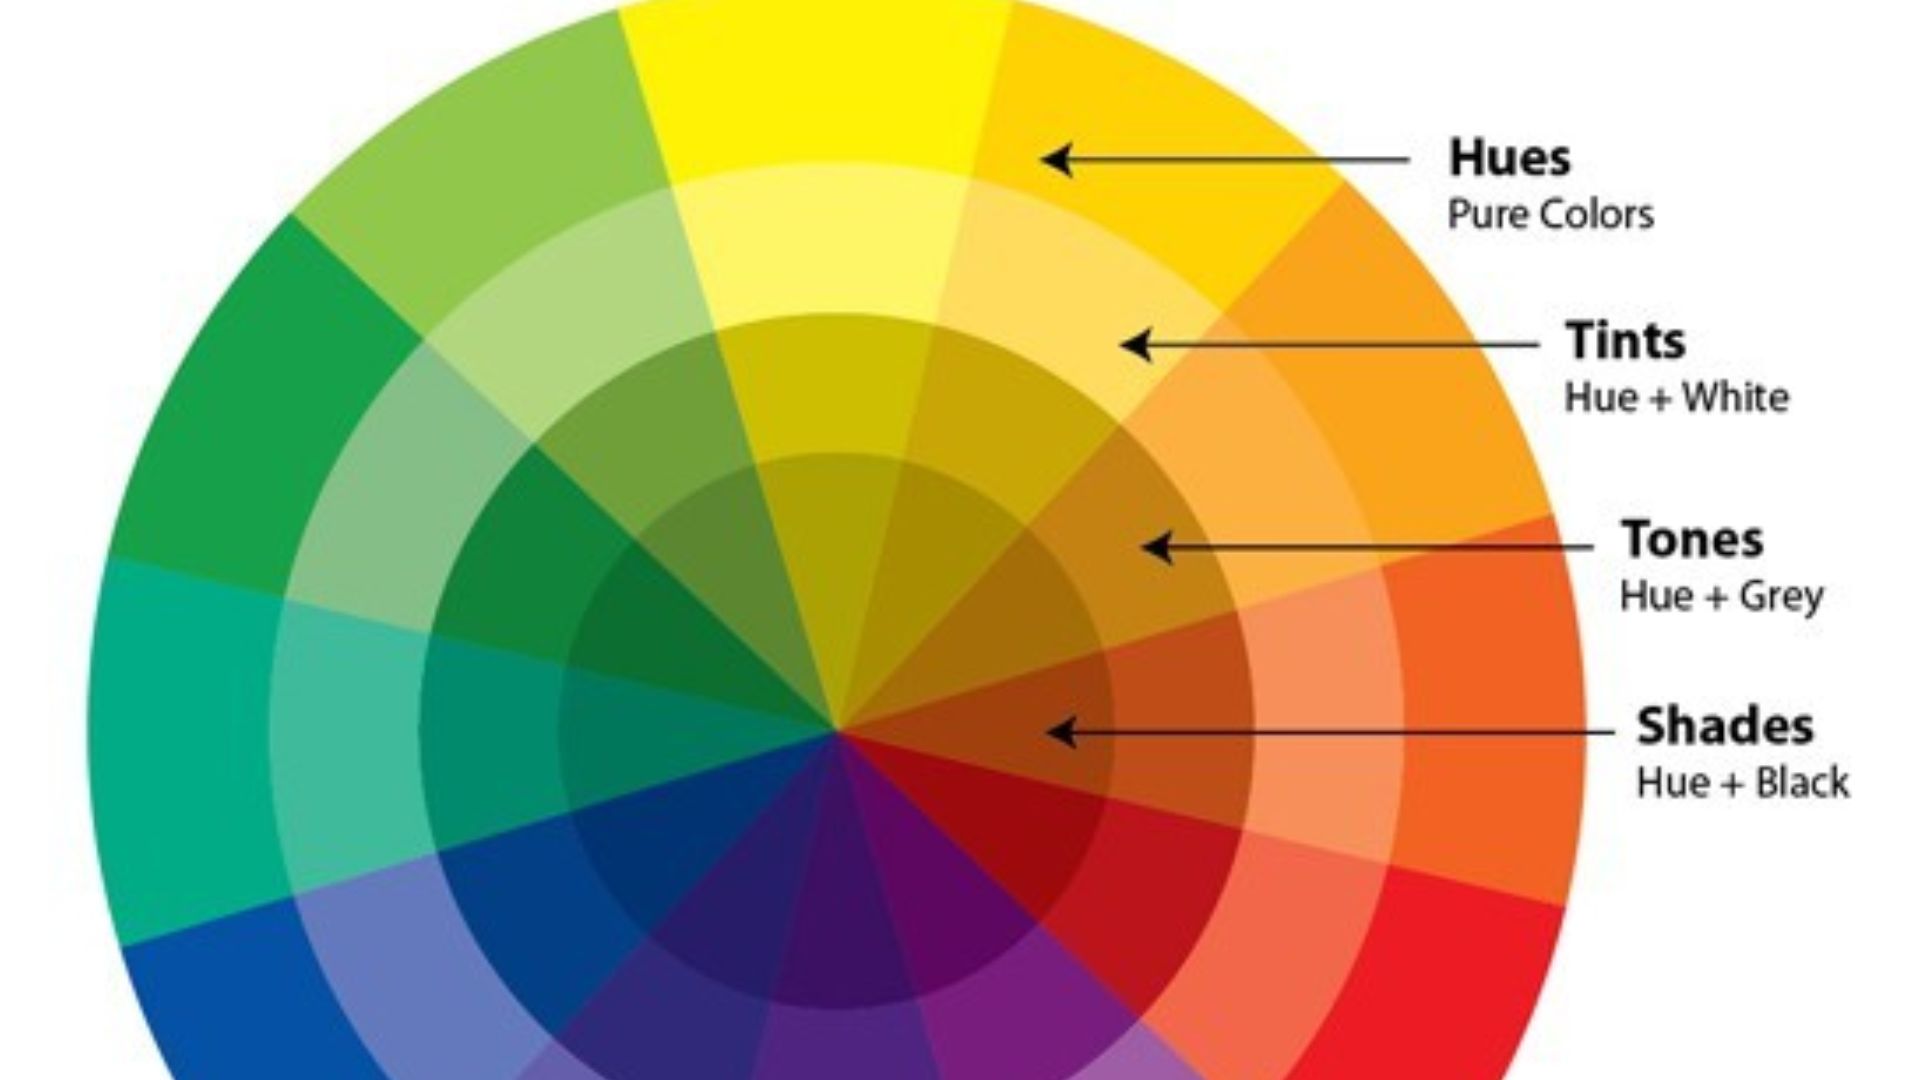 HHue - A New Paradigm In Color Technology